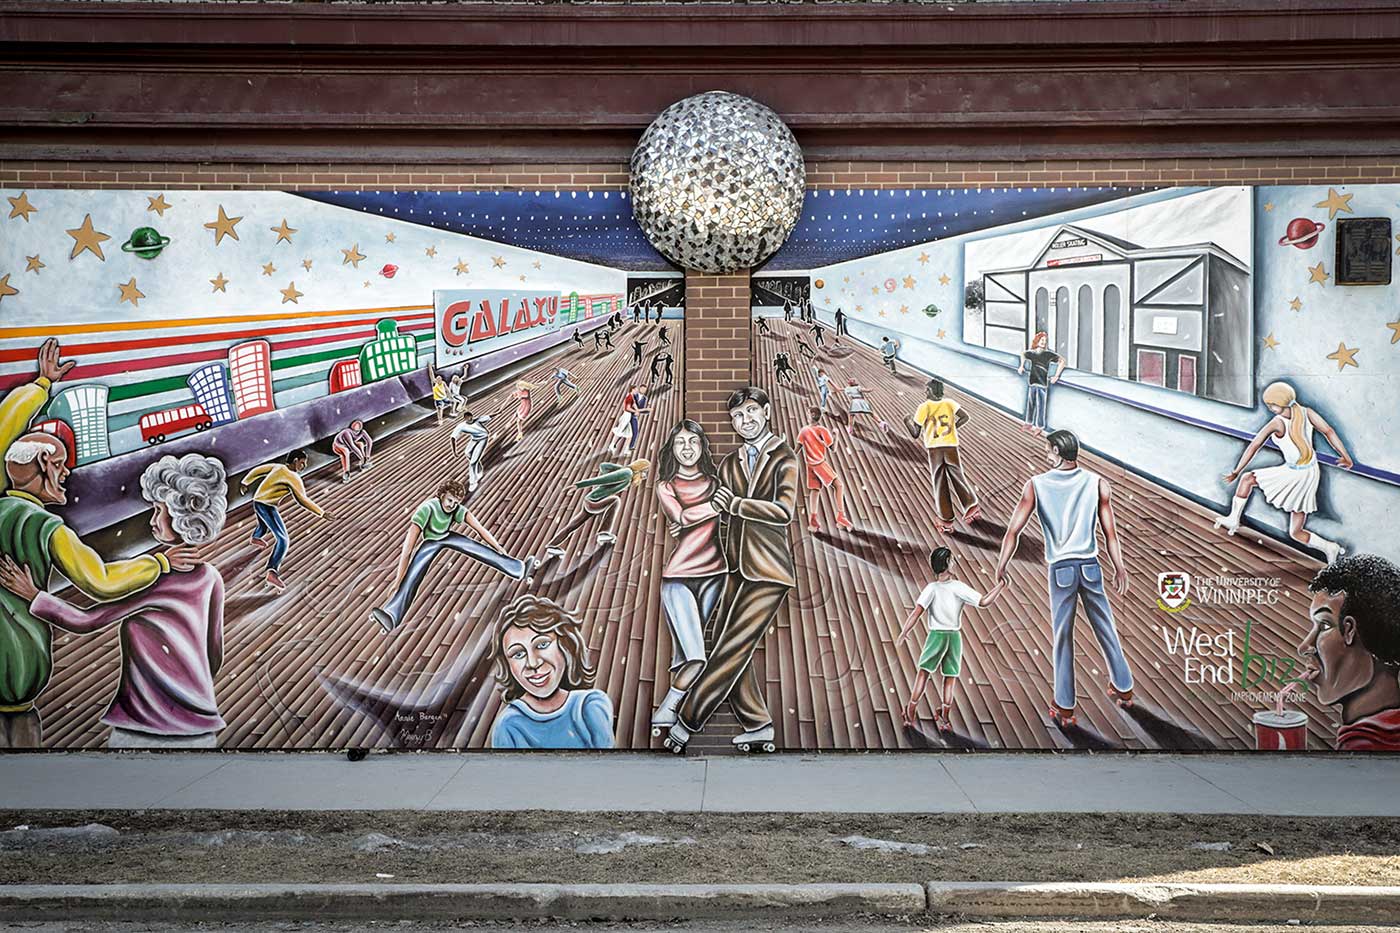 Remembering the Roller Rink – Mural on Portage Avenue, Winnipeg, painted by Annie Bergen and Marcus Bauer with mosaic disco ball by Ursula Neufeld. 2011. The mural pays tribute to the former Winnipeg Roller Rink, a popular social venue from the 1930s that stood here until its demolition in 2007.